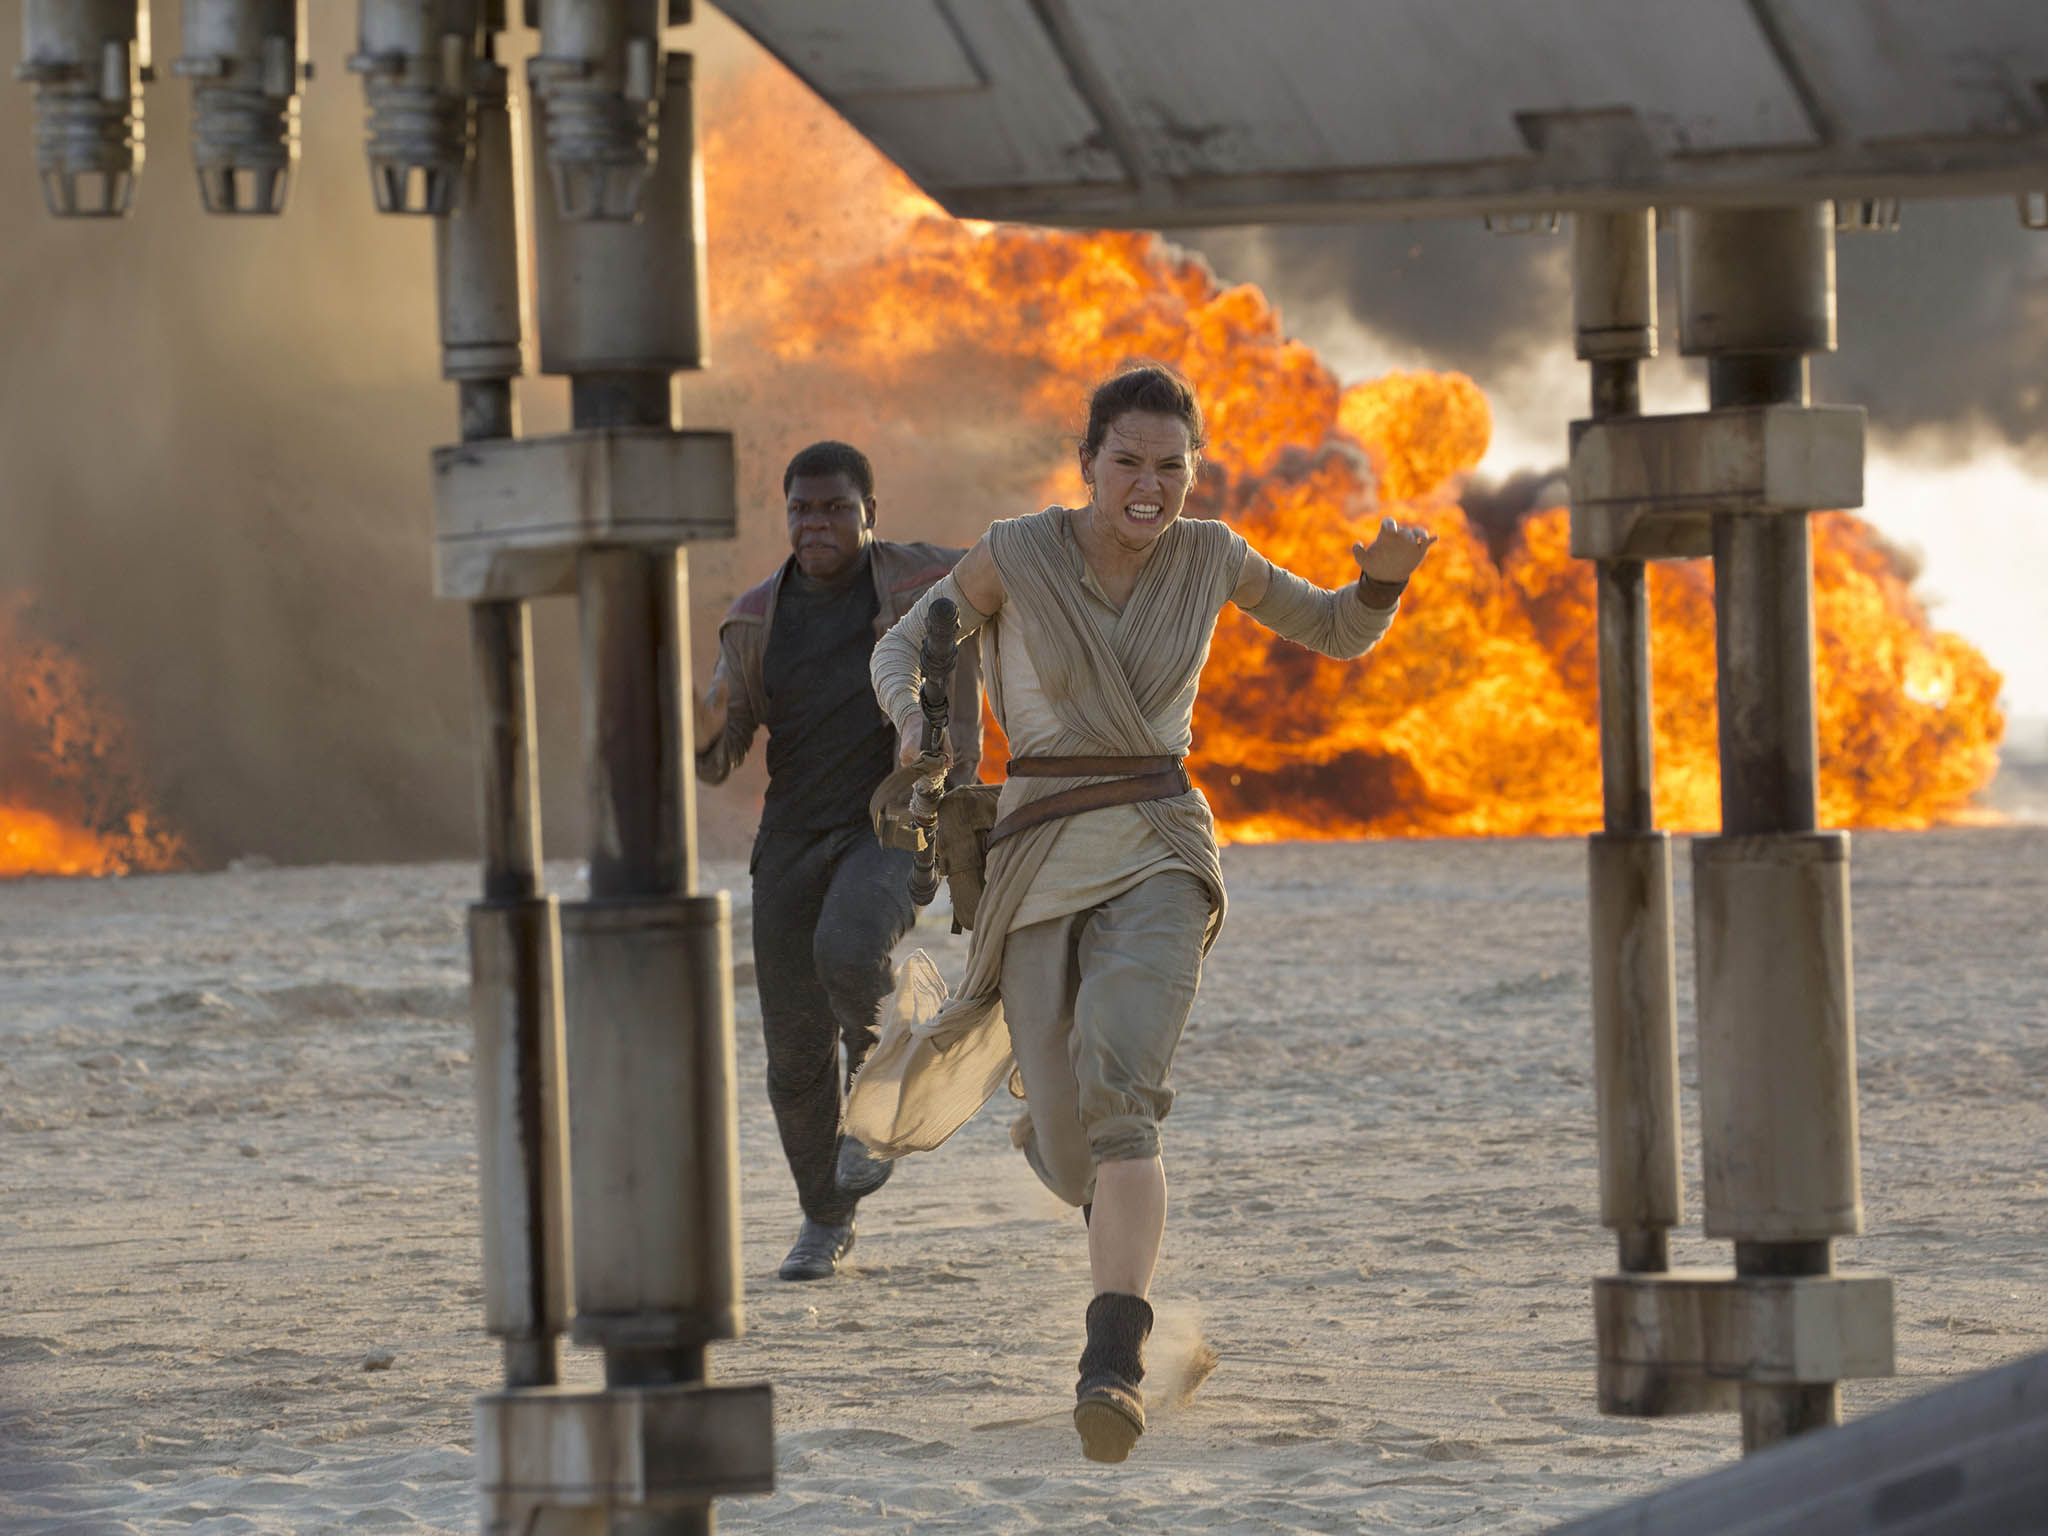 Daisy Ridley is 'the business' in new Star Wars movie The Force Awakens